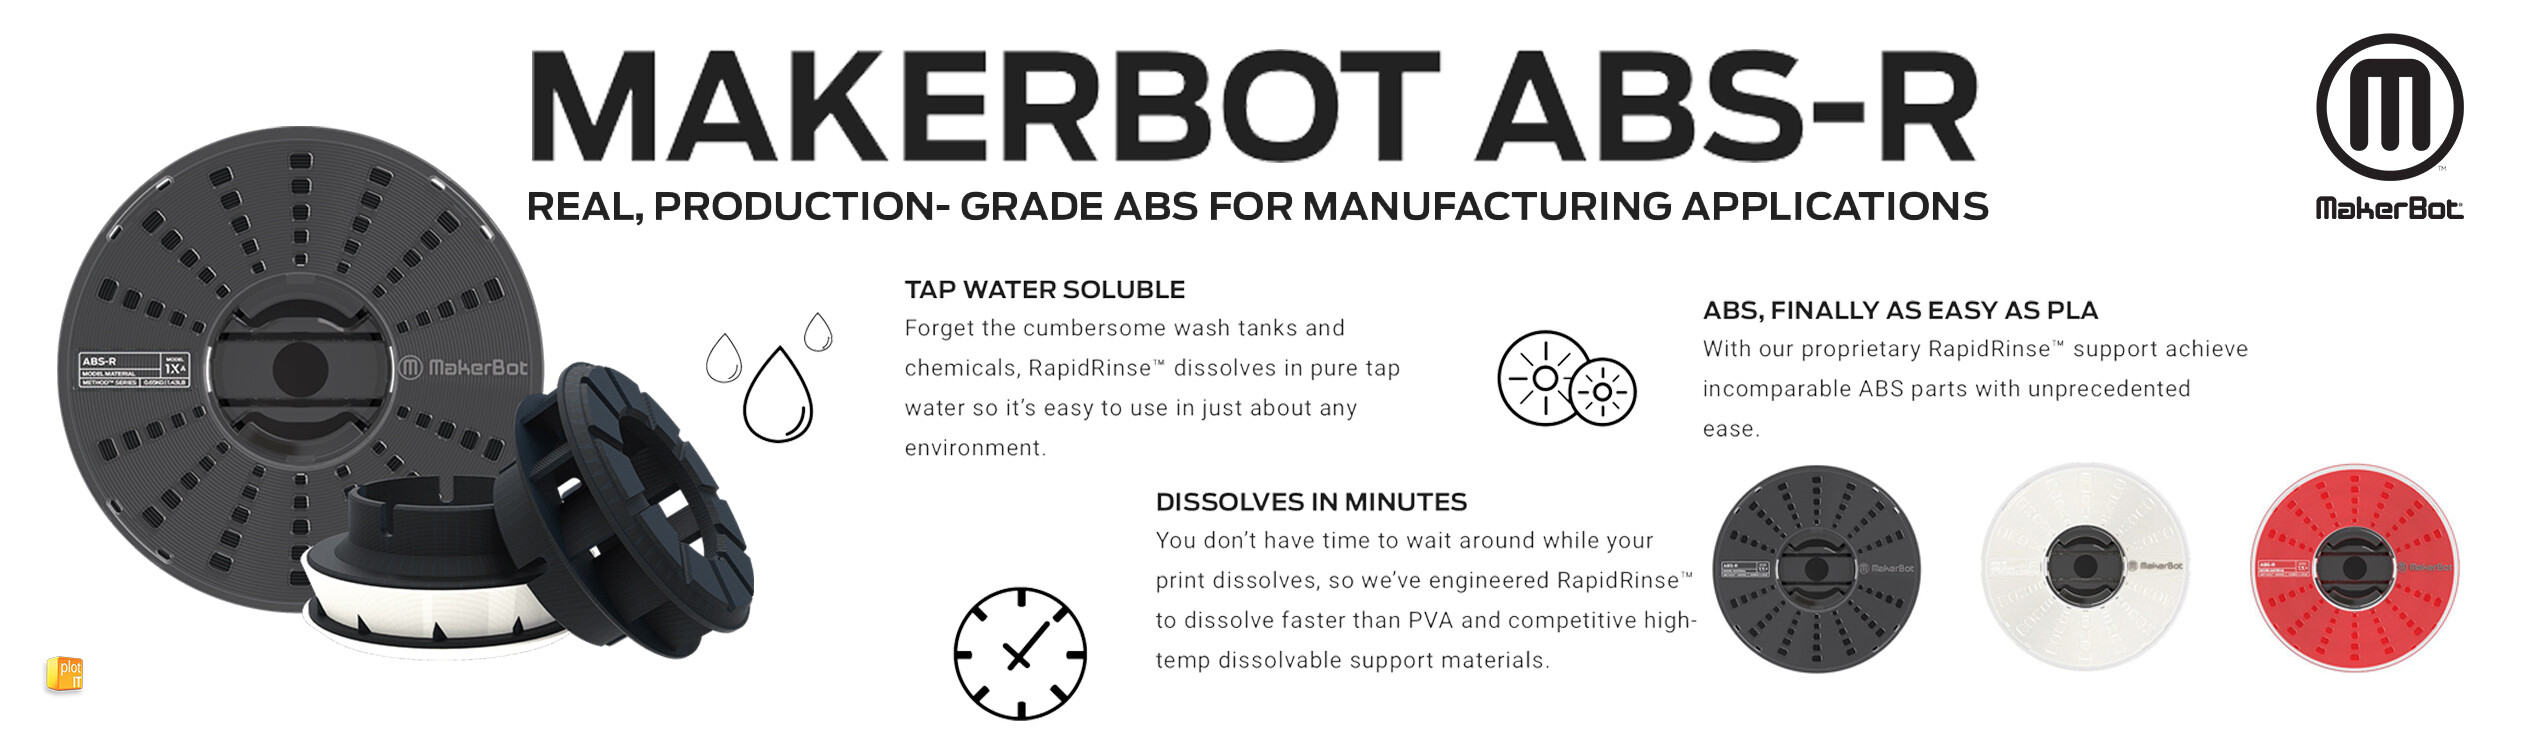 MakerBot ABS-R MAIN BANNER